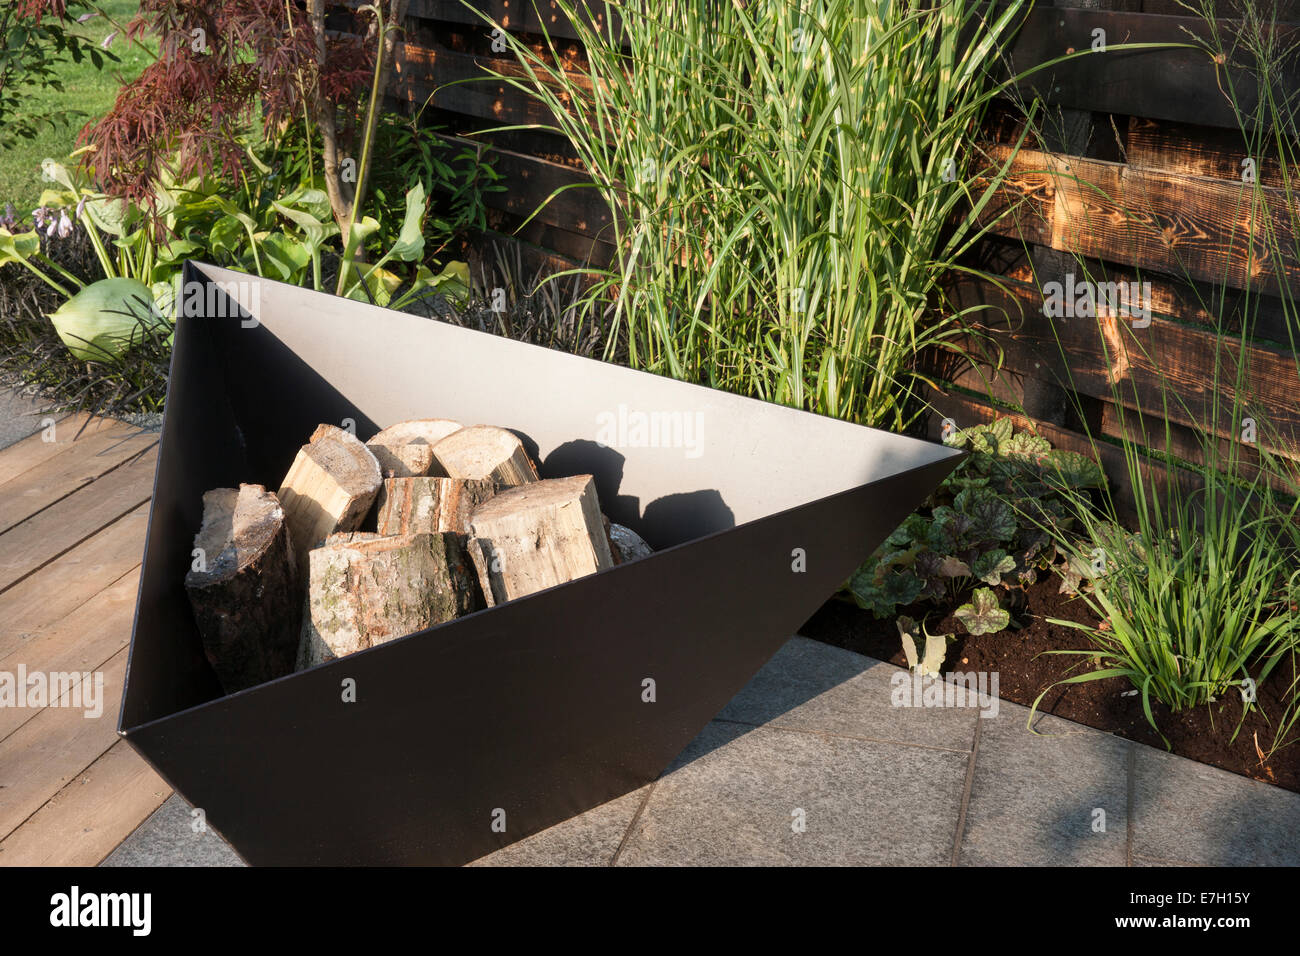 Garden - Elemental - garden fire pit firepit and charred burned redwood timber board wall - basalt patio stone and planting of zebra grass Stock Photo